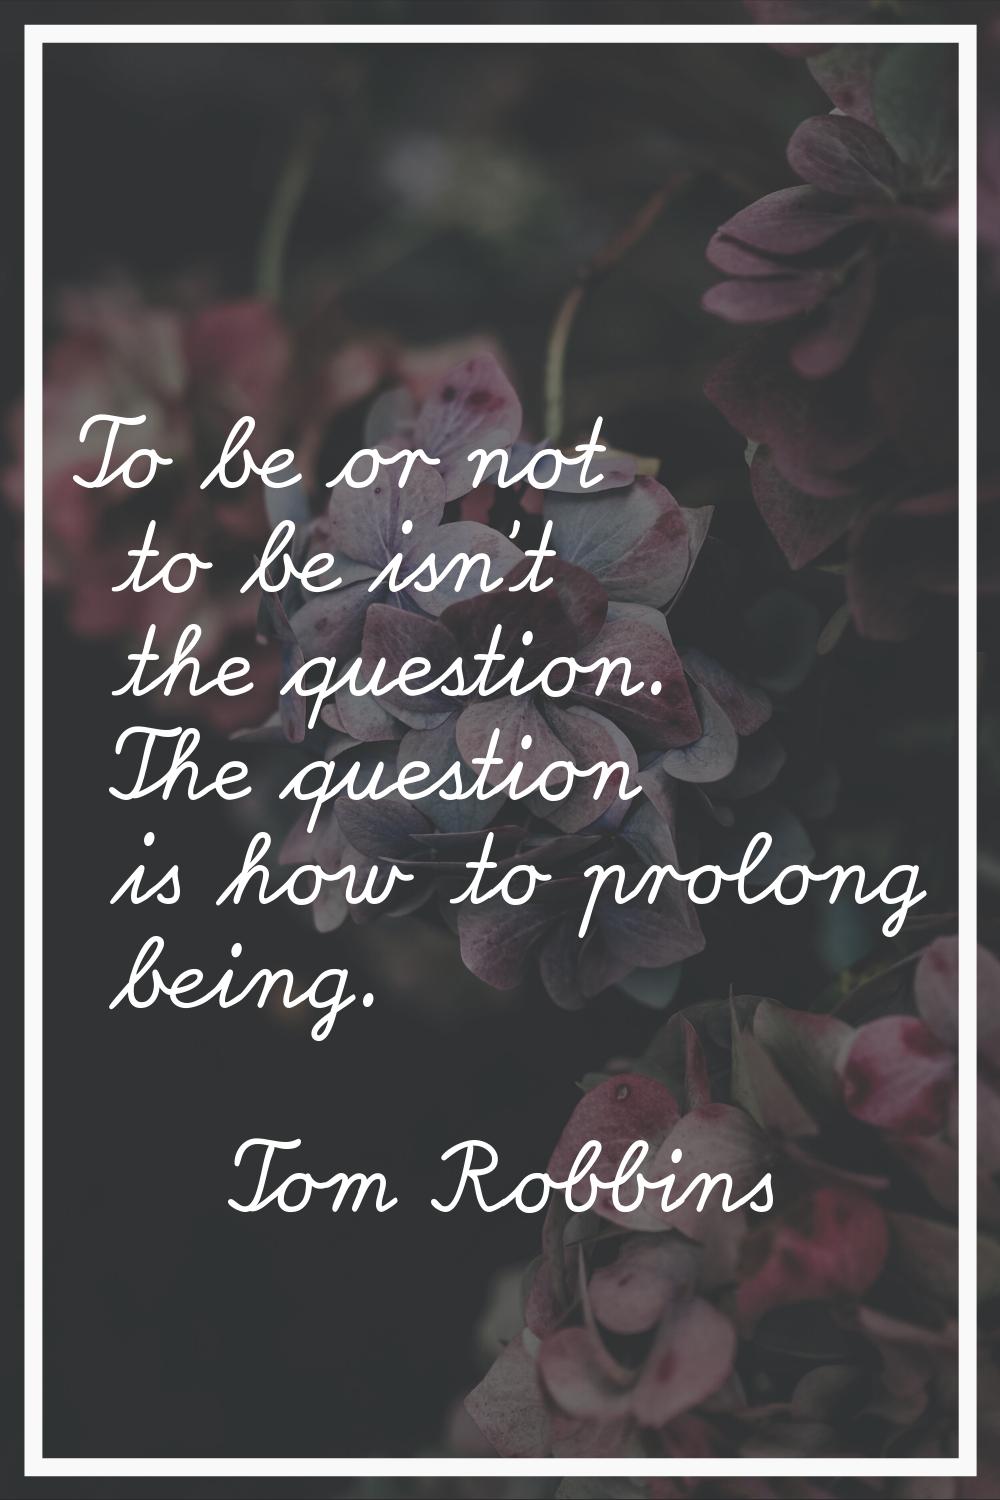 To be or not to be isn't the question. The question is how to prolong being.